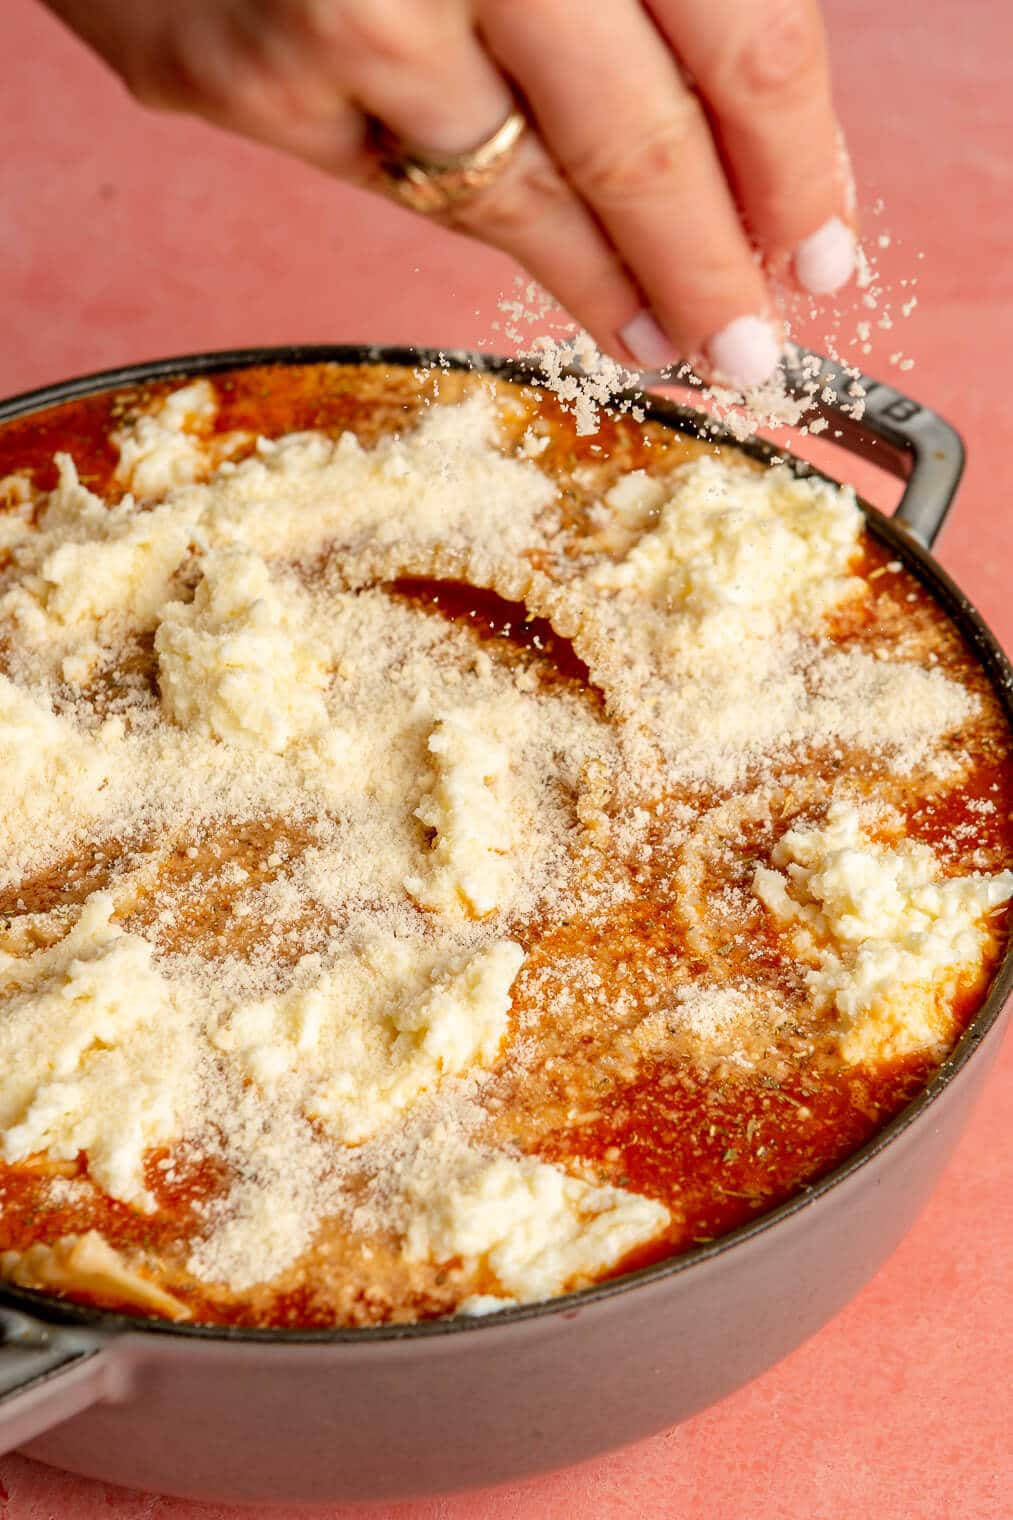 A person sprinkling parmesan cheese over lasagna soup.